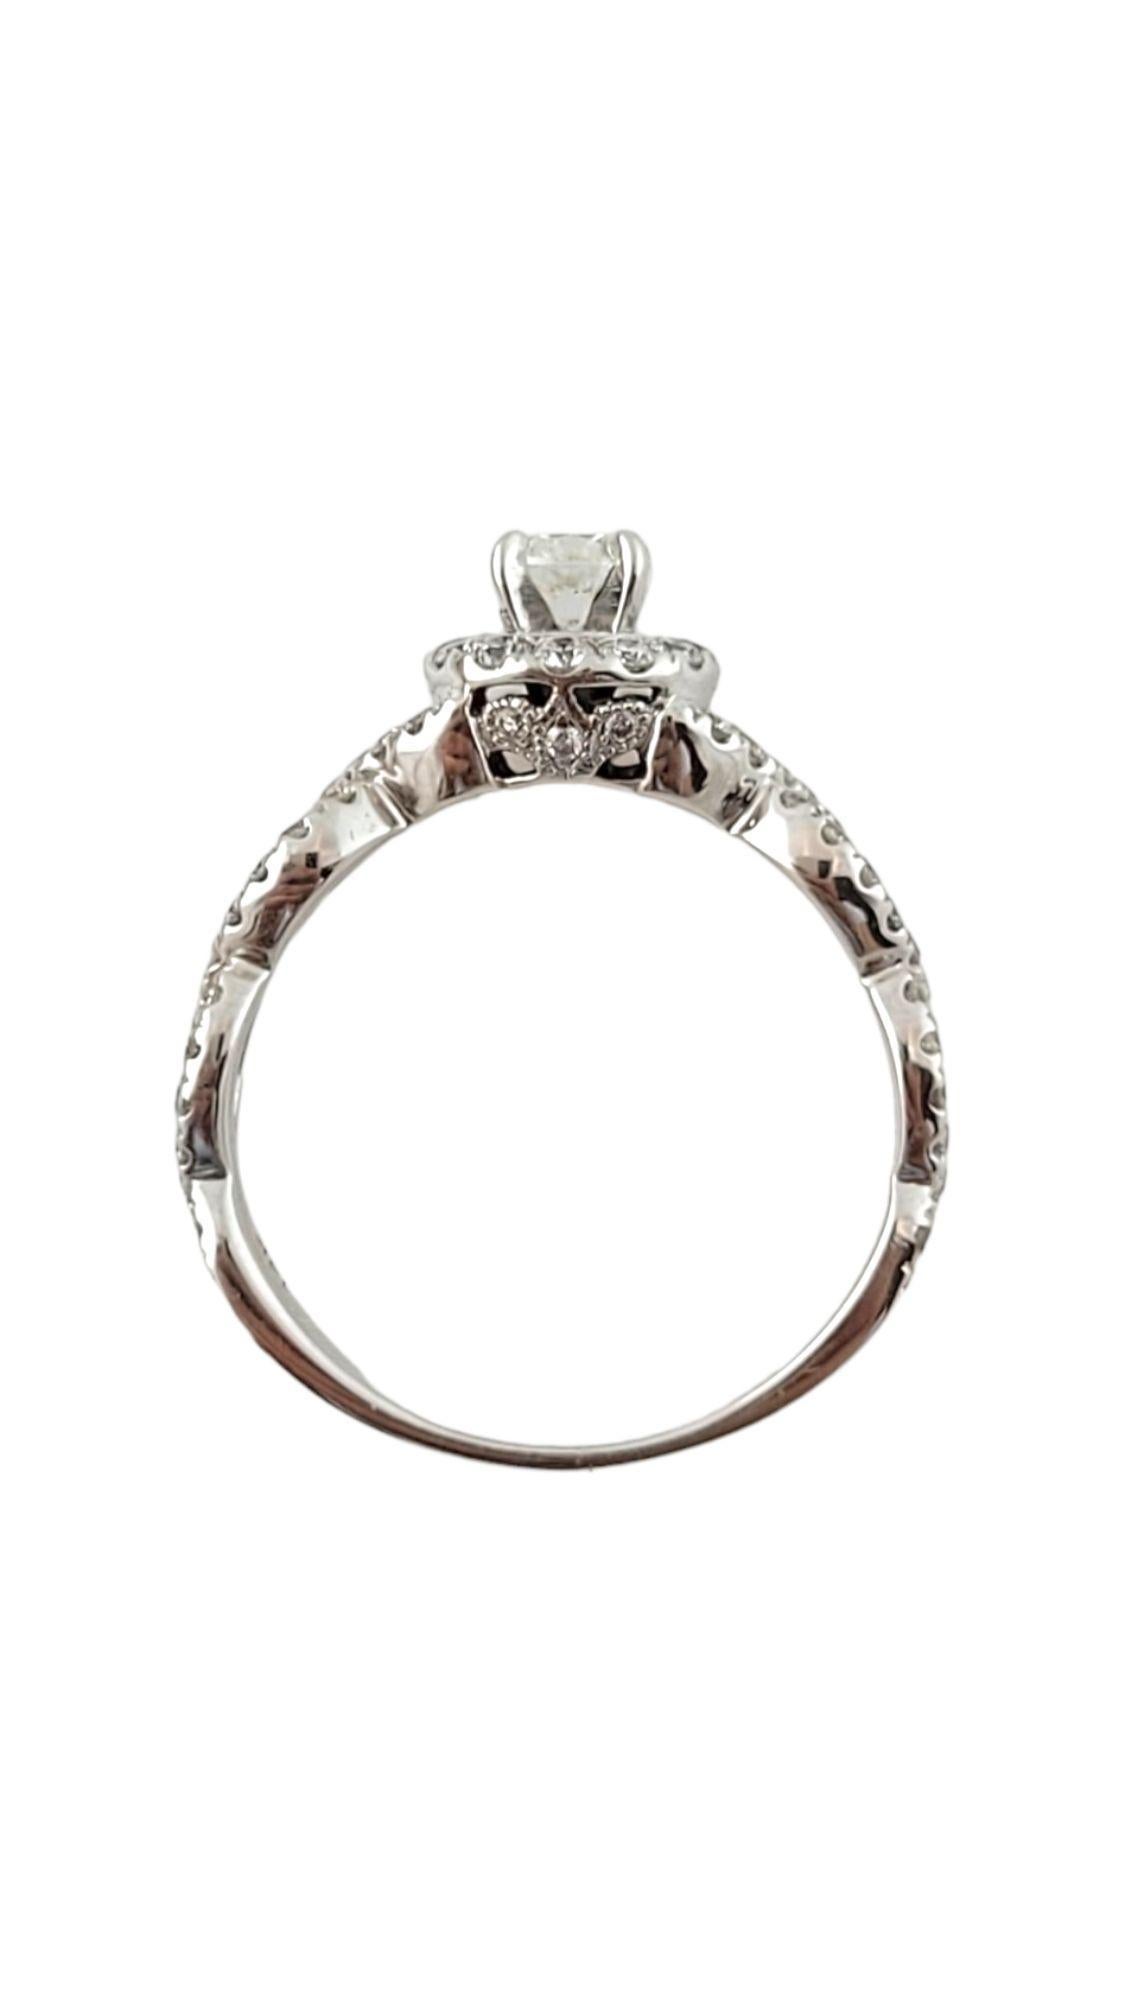 Neil Lane 14K White Gold Diamond Halo Ring Size 7.25 #14991 In Good Condition For Sale In Washington Depot, CT